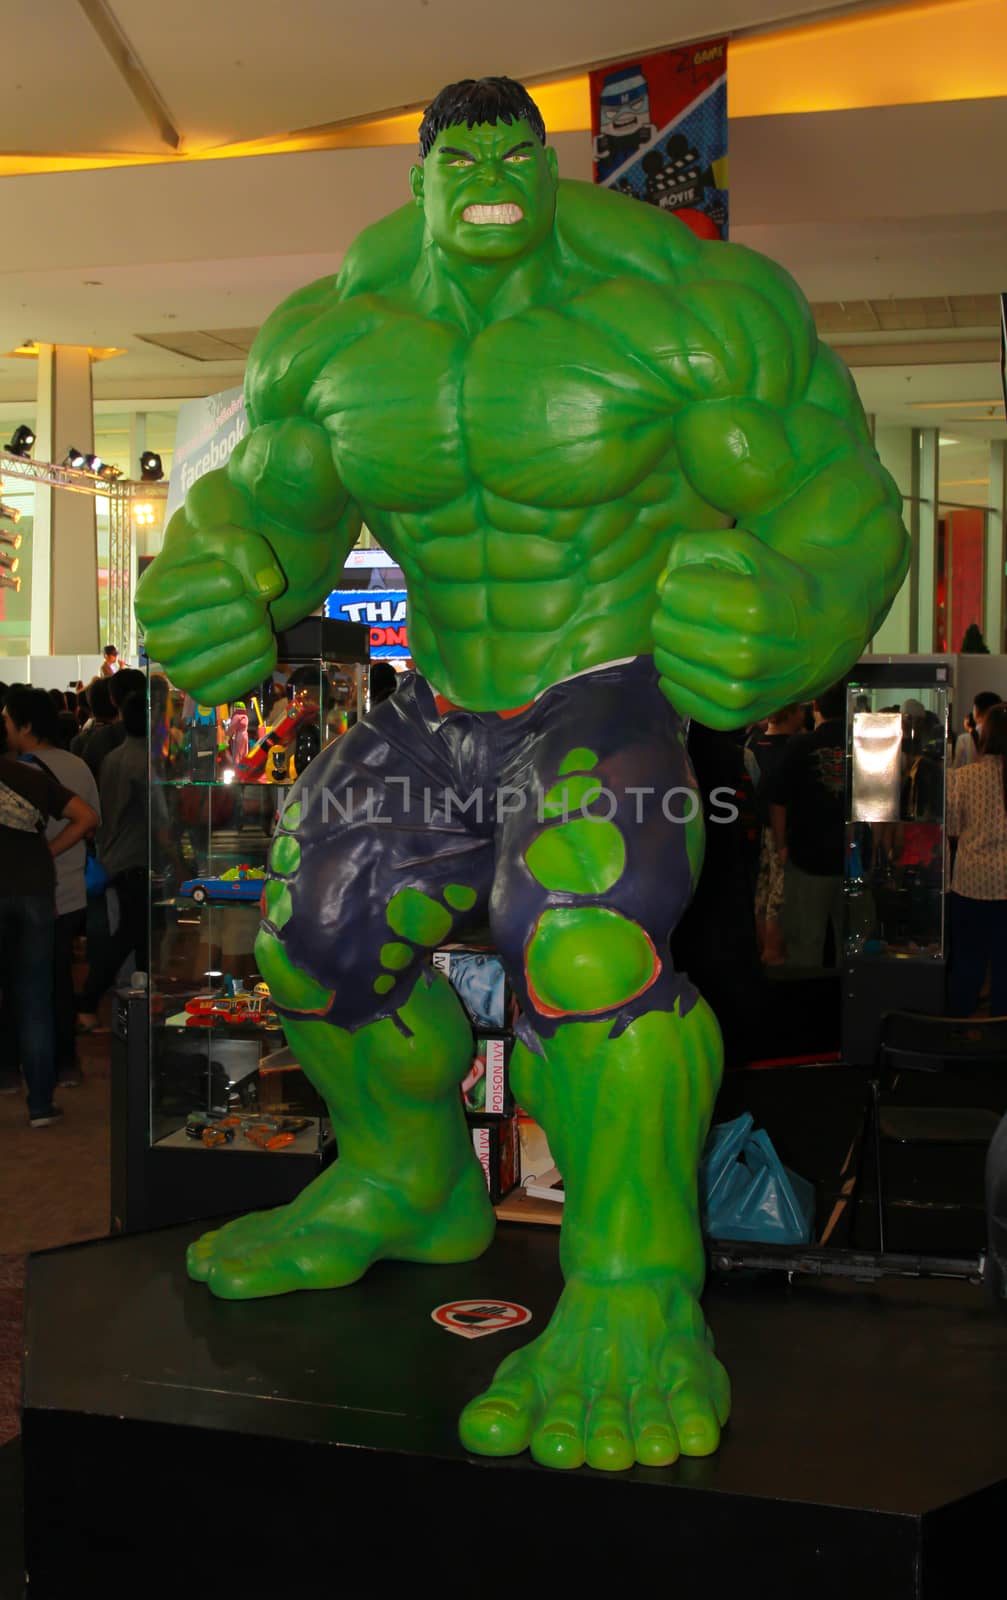 A model of the character Hulk from the movies and comics 2 by redthirteen